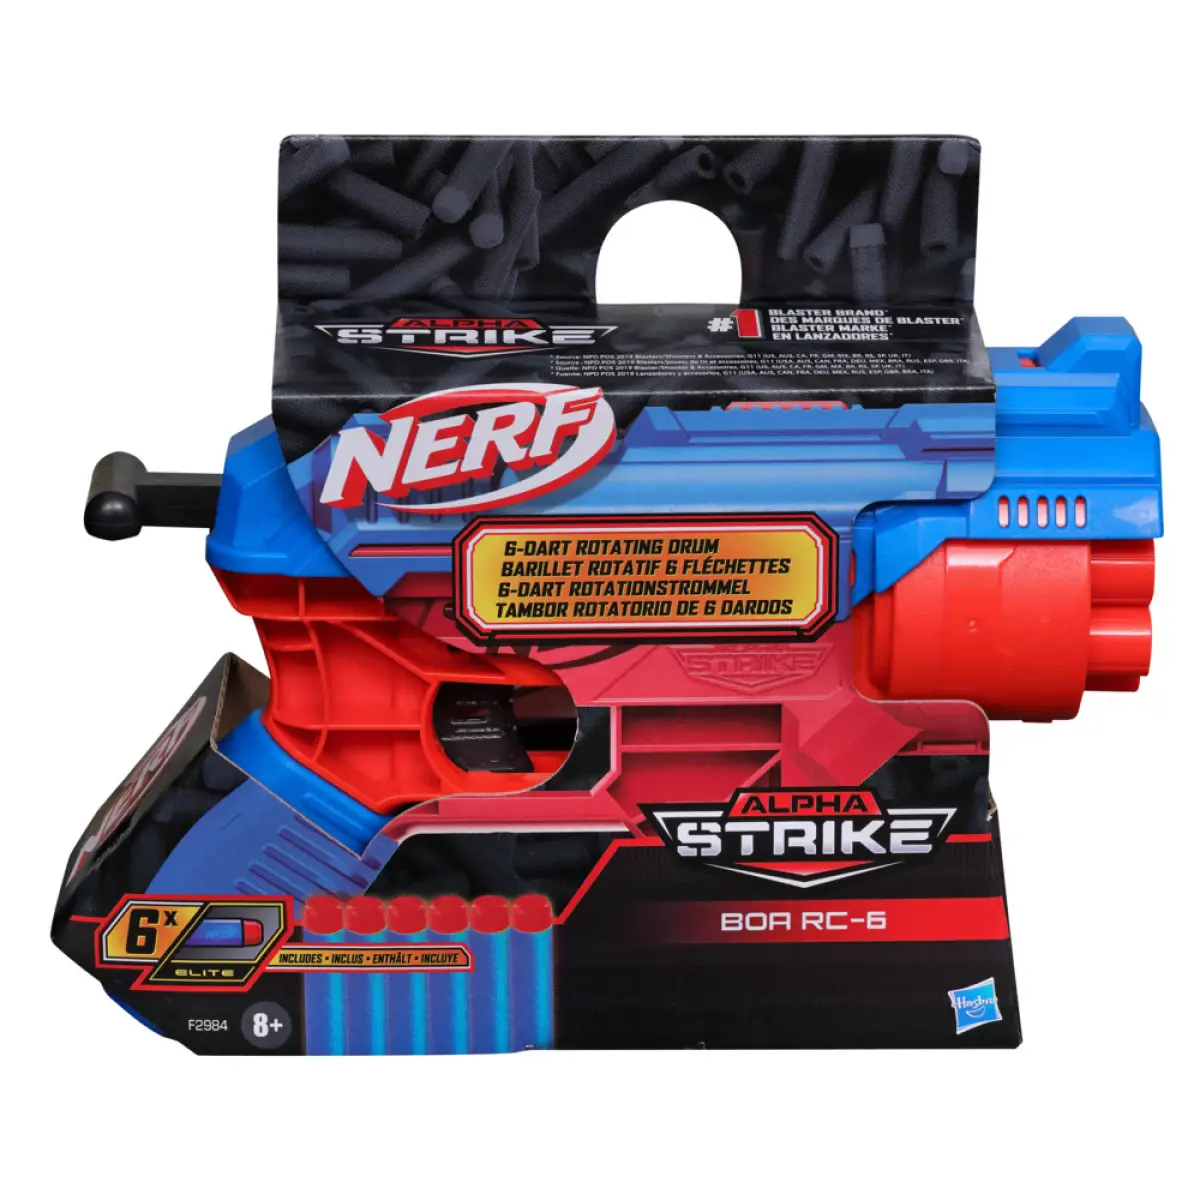 Nerf Alpha Strike Boa Rc-6 Dart Blaster With 6-Dart Rotating Drum -- Fire 6 Darts In A Row -- Includes 6 Official Nerf Elite Darts